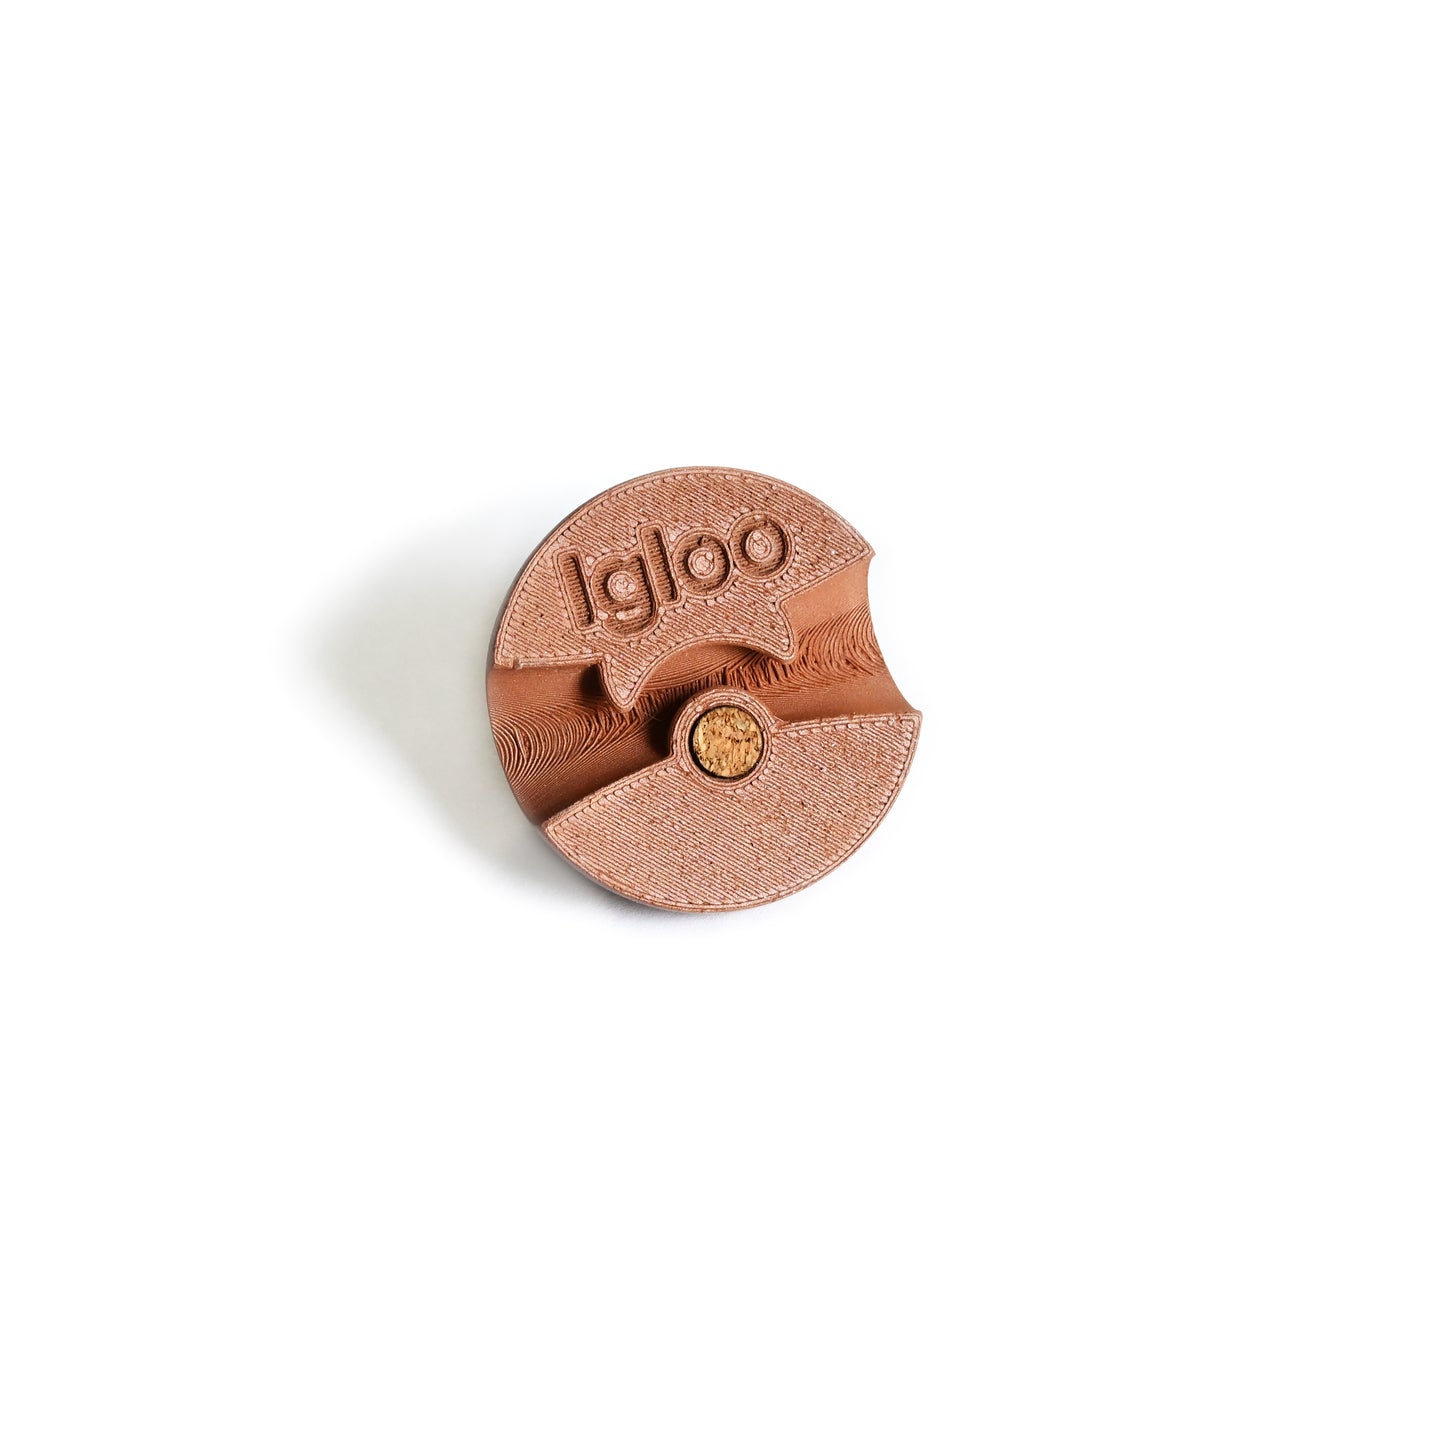 Igloo cut cable holder - Copper